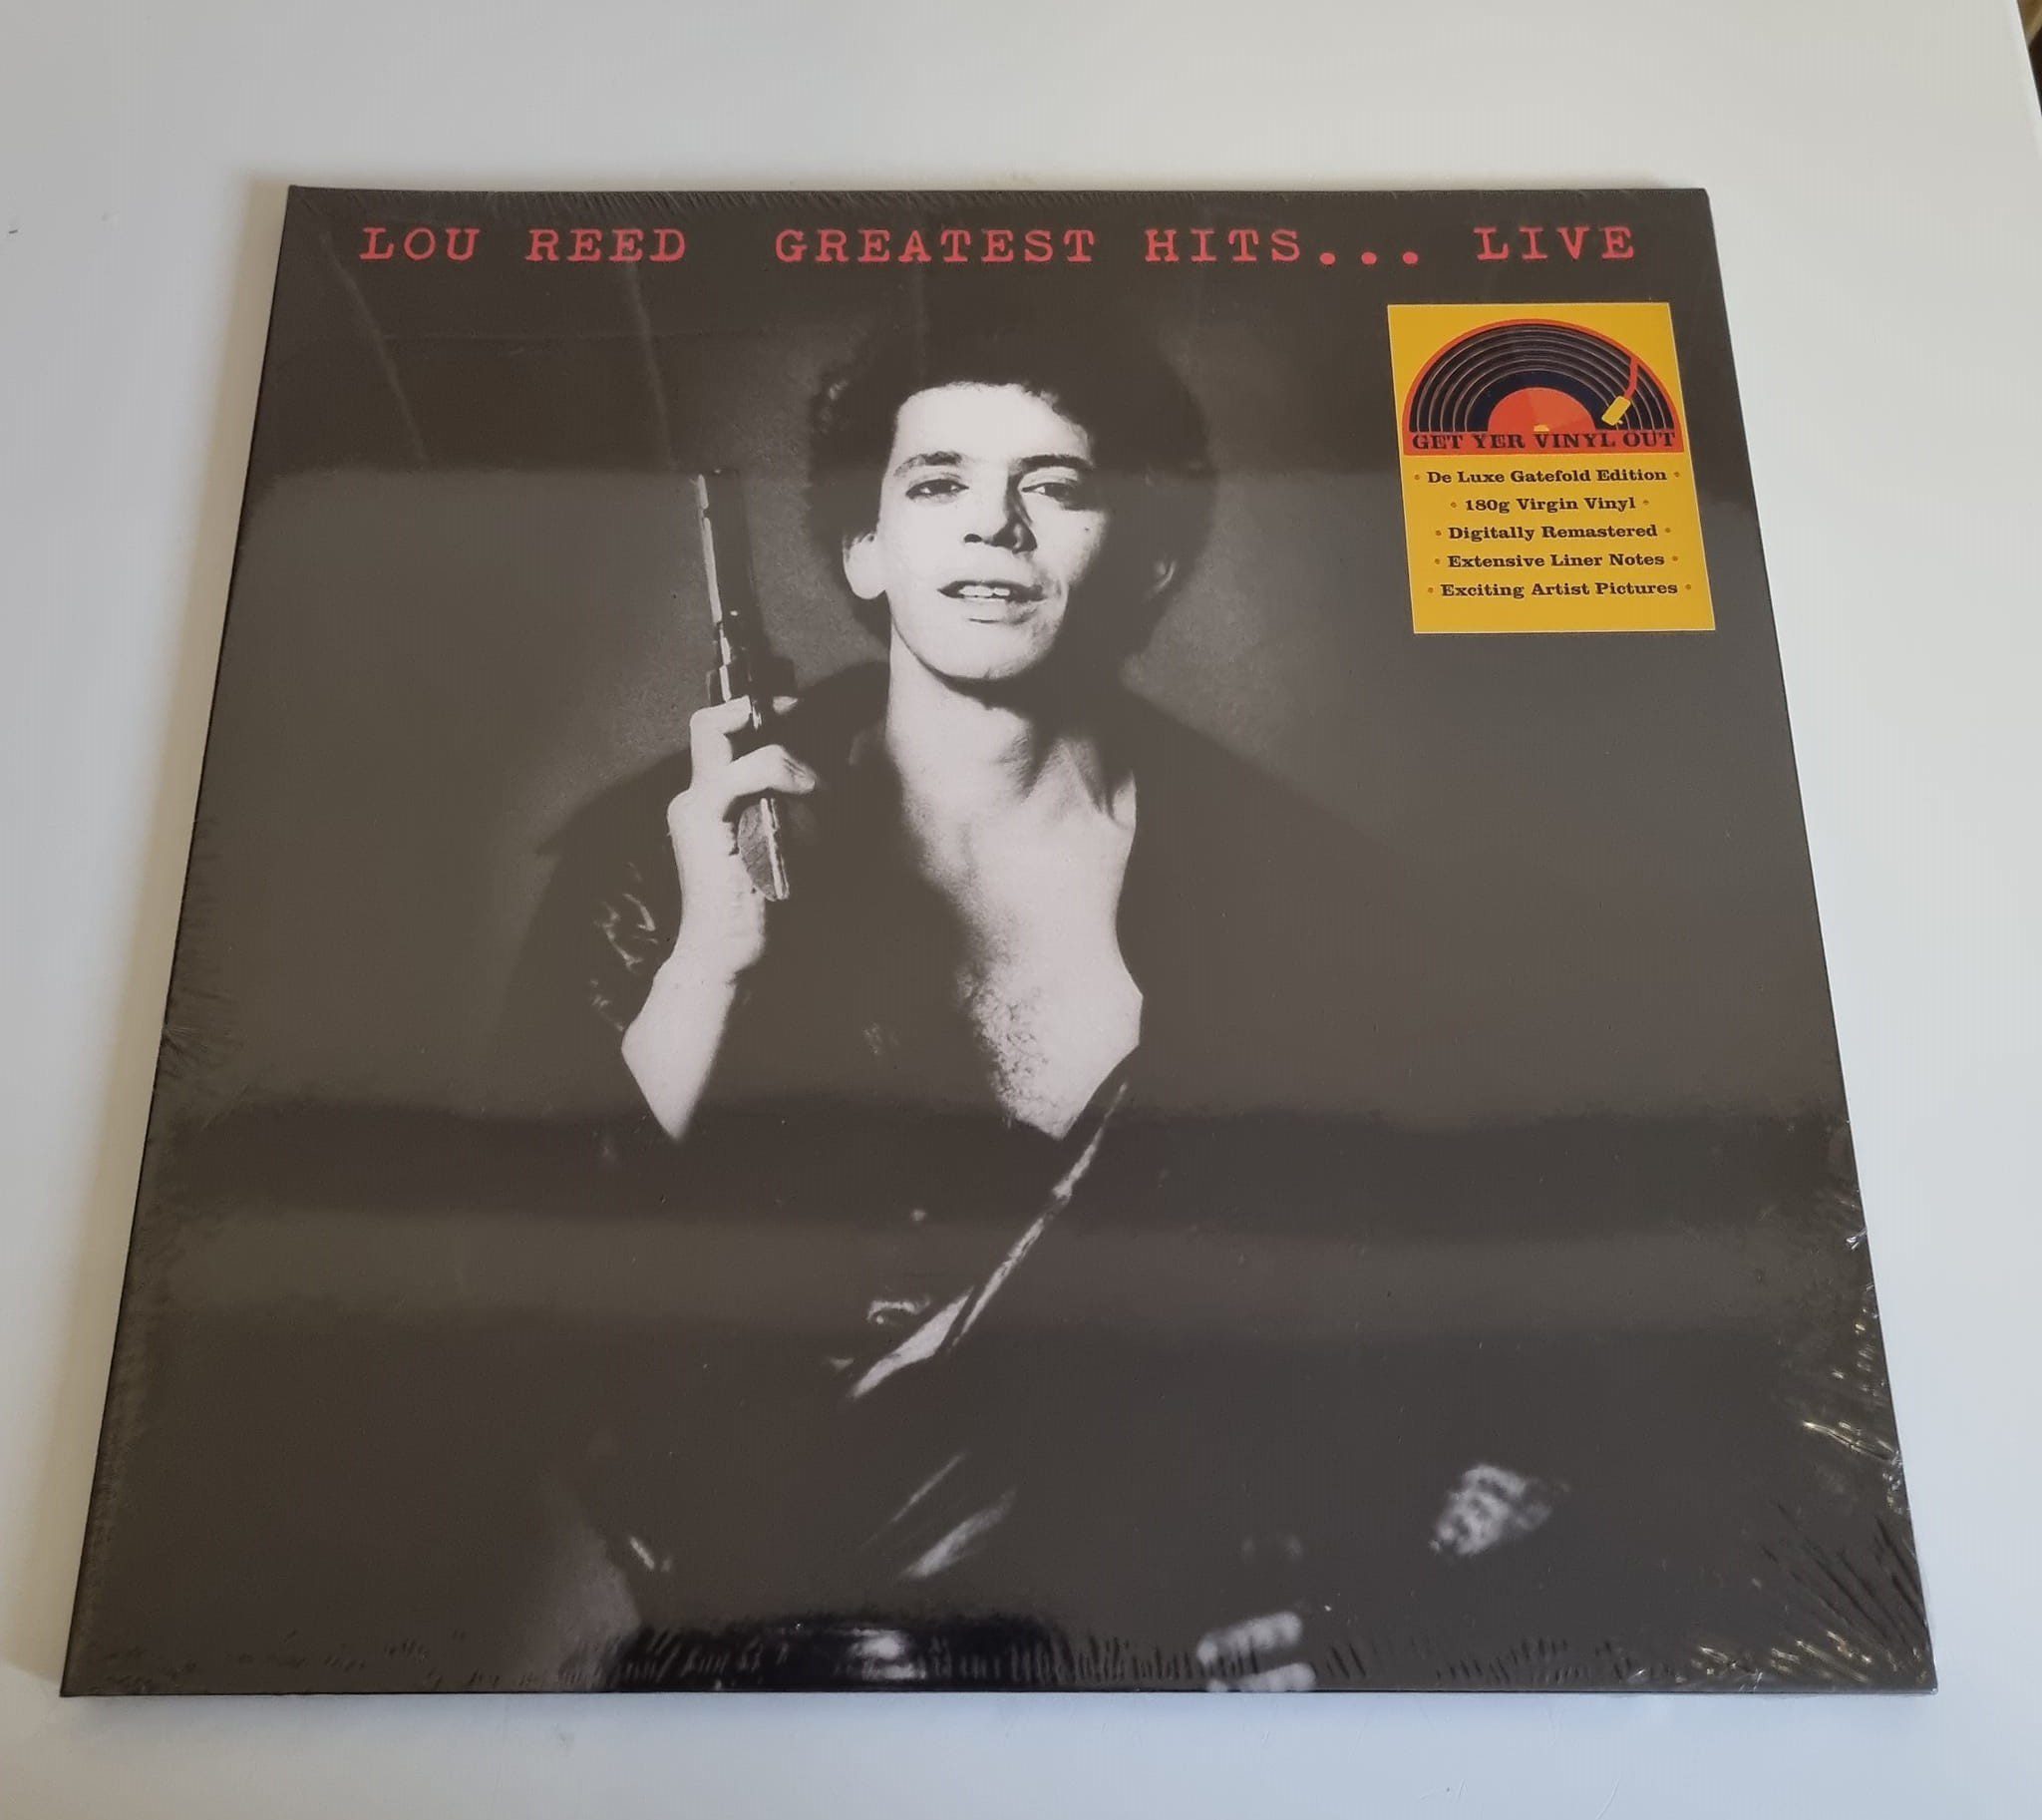 Buy this rare Lou Reed record by clicking here